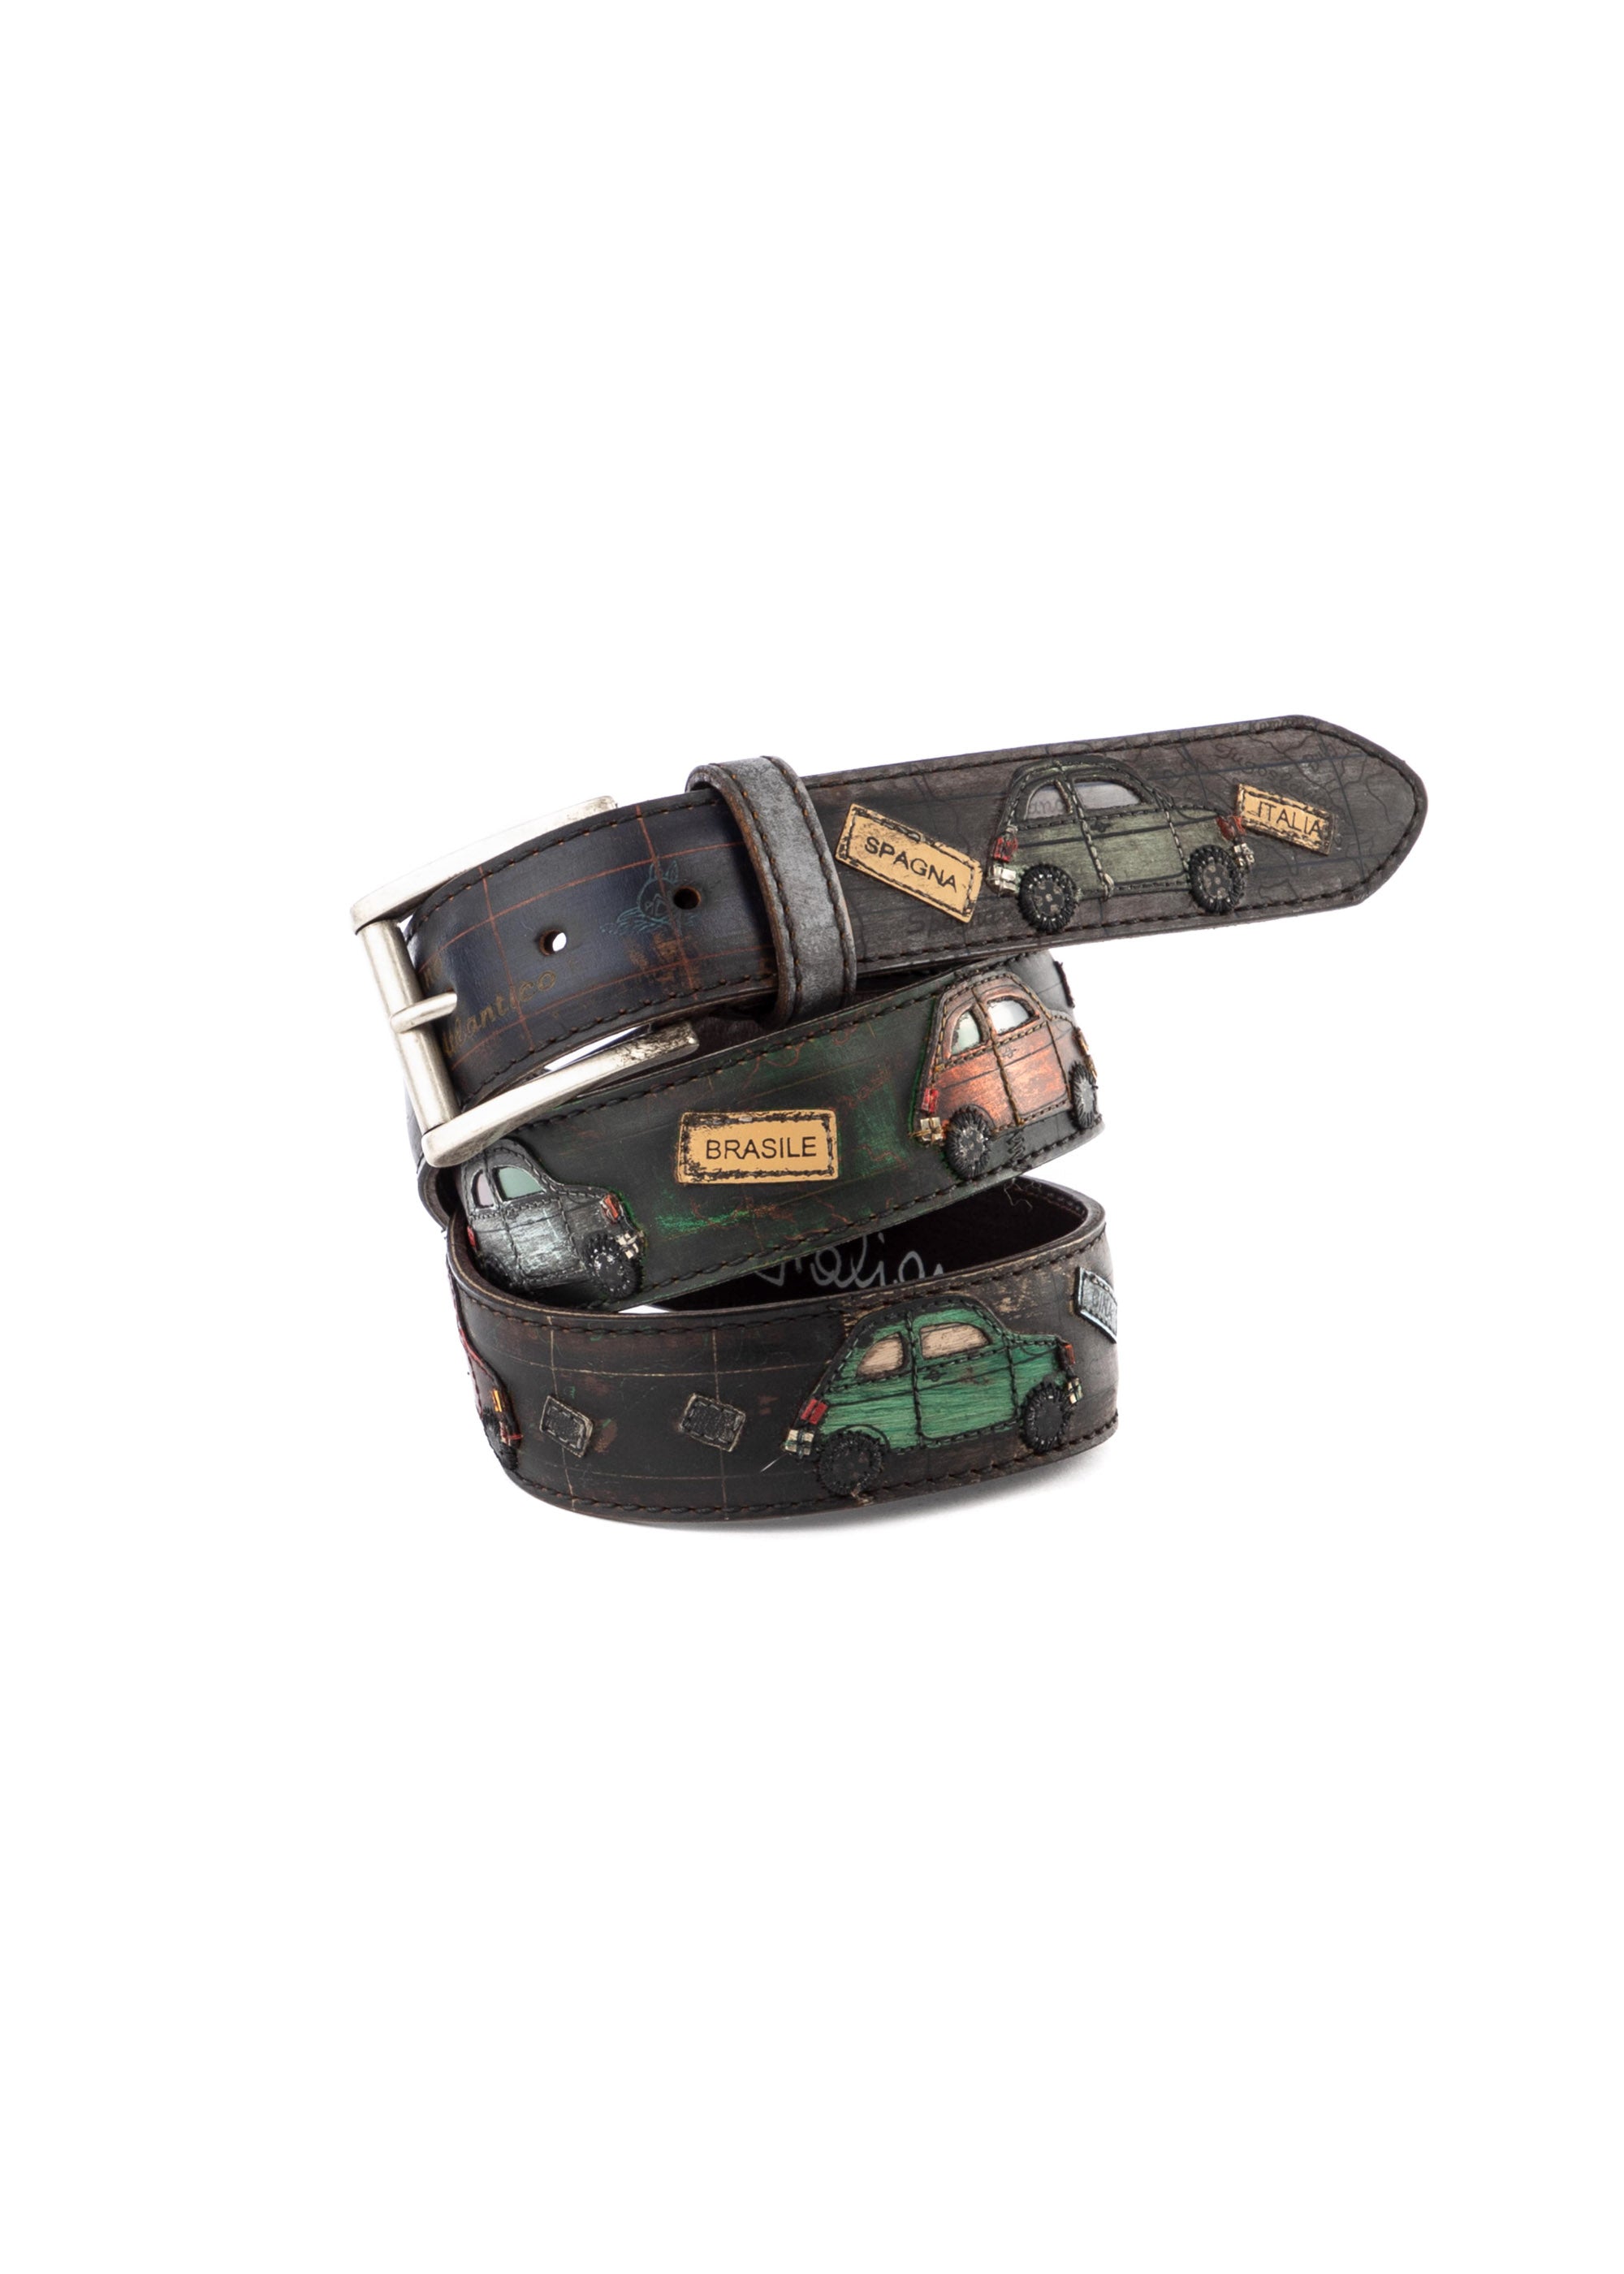 Multicolor "around the world" handcrafted belt